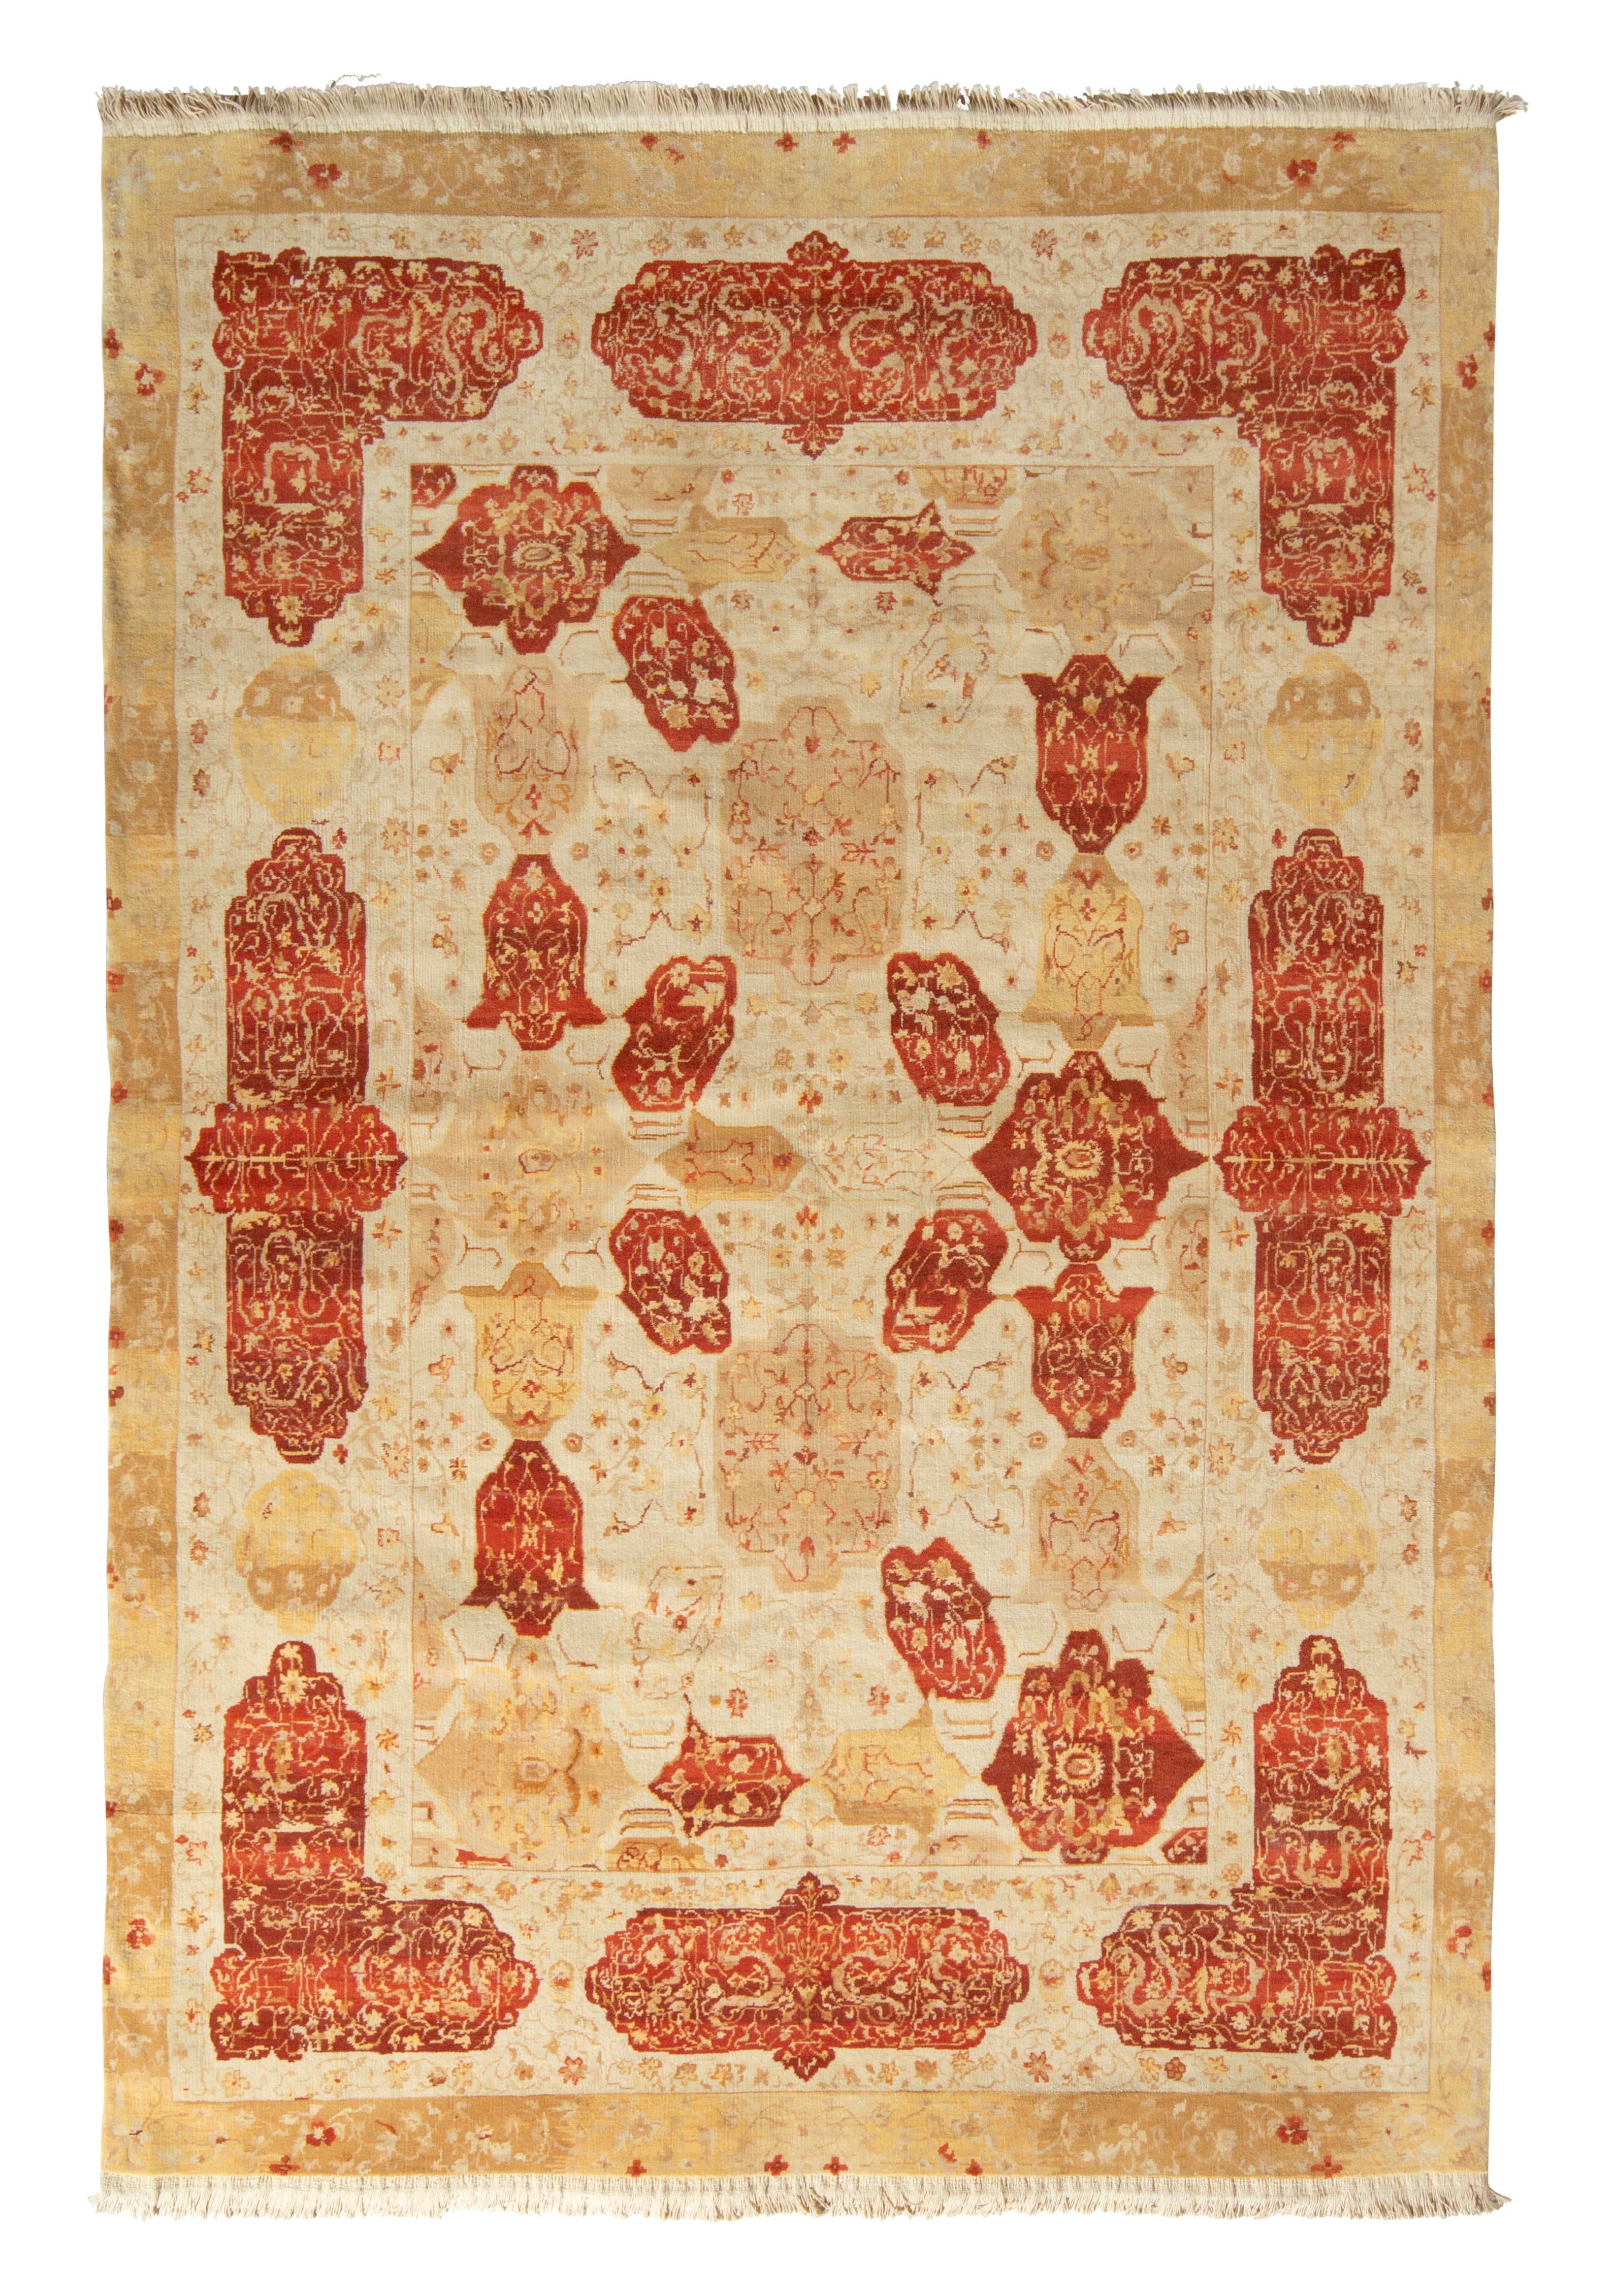 Rug & Kilim’s Classic Agra style rug in Beige-Brown and Red Floral Cartouches For Sale